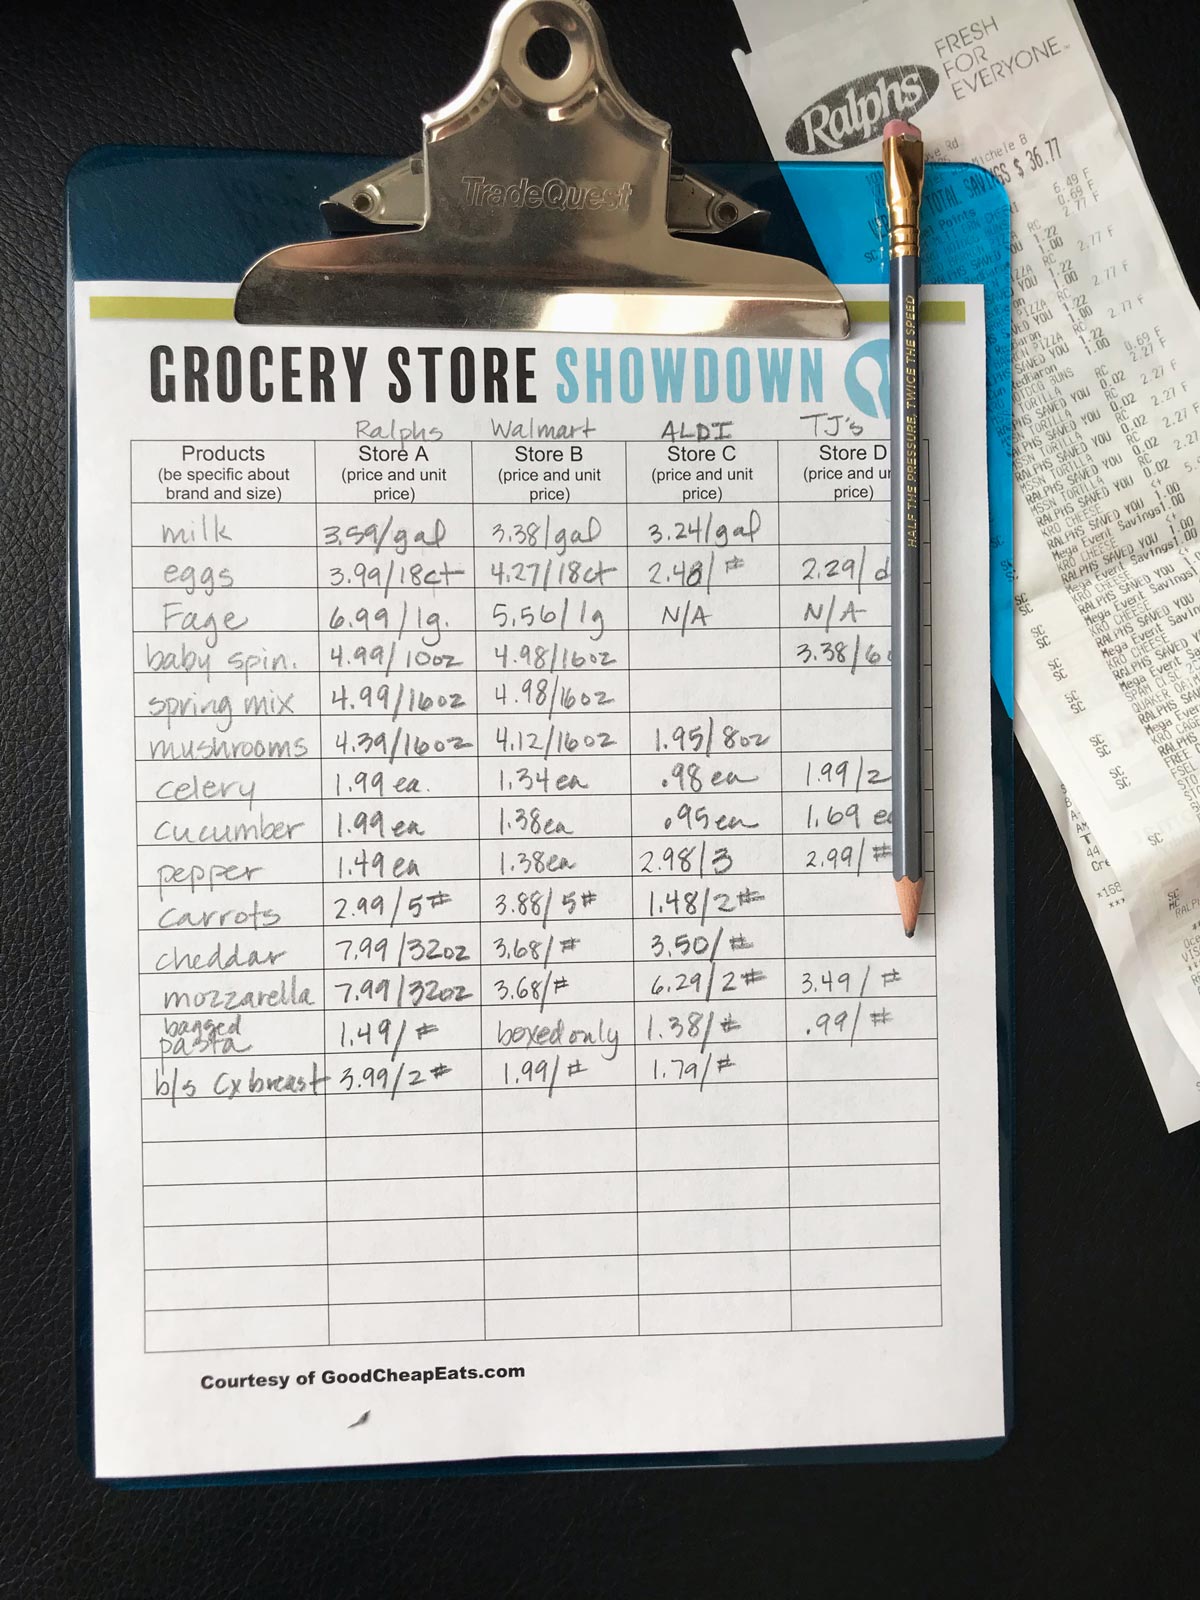 blue clipboard with worksheet for grocery store showdown, with pencil and receipts.